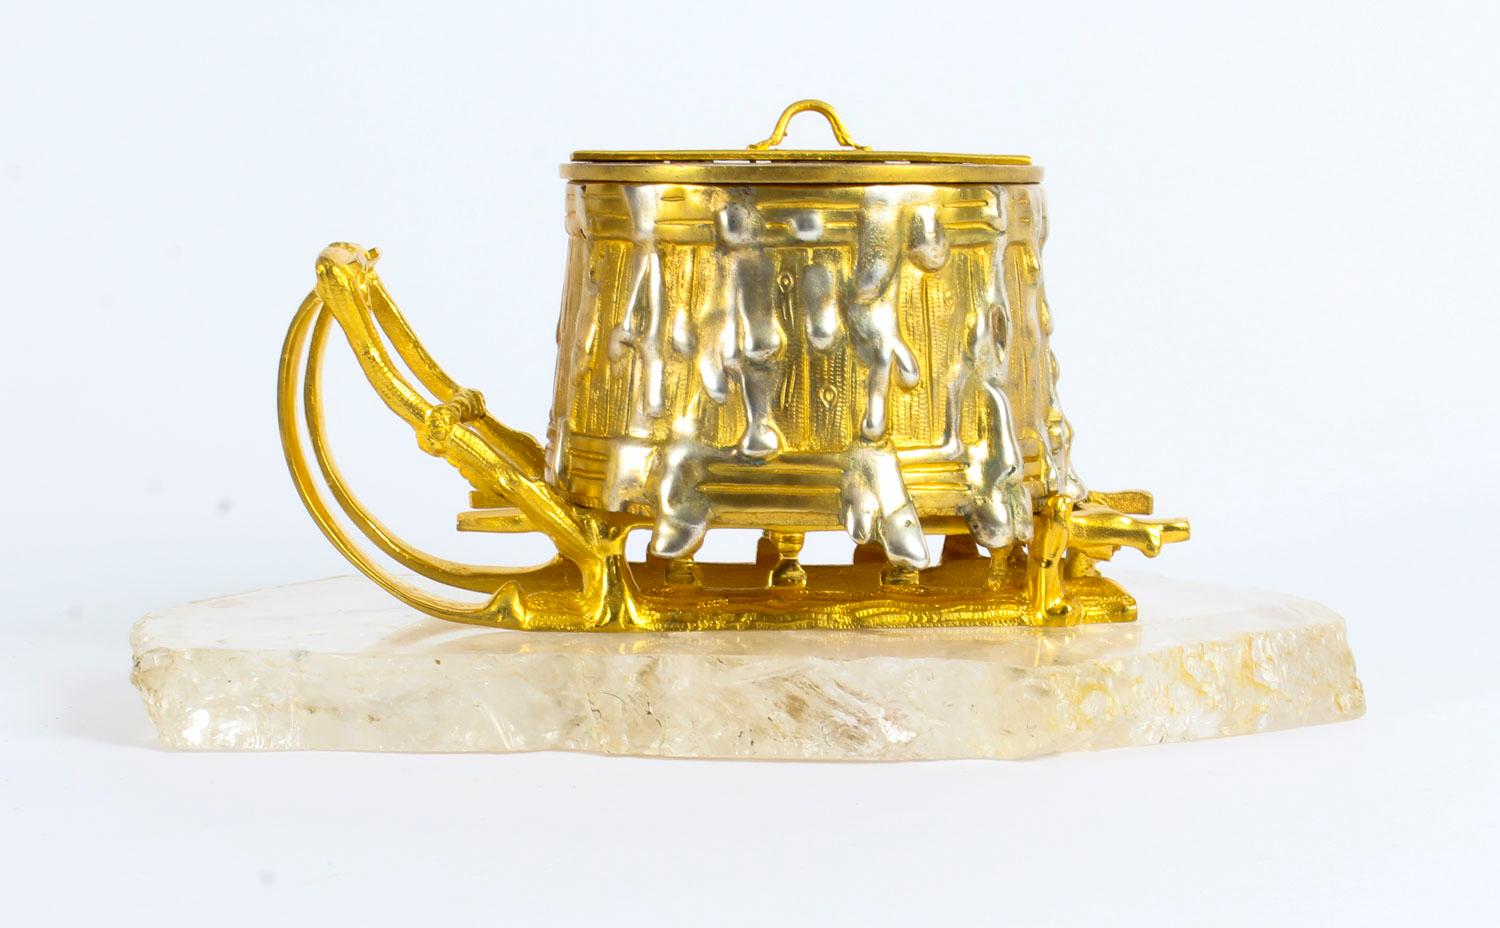 This exceptional Russian ormolu and rock crystal encrier inkwell dates from circa 1840.

The omolu inkwell is modelled as an overflowing barrel on a sled. The pan cover lifts off using the central handle and it is pierced for pounce. Pounce is a